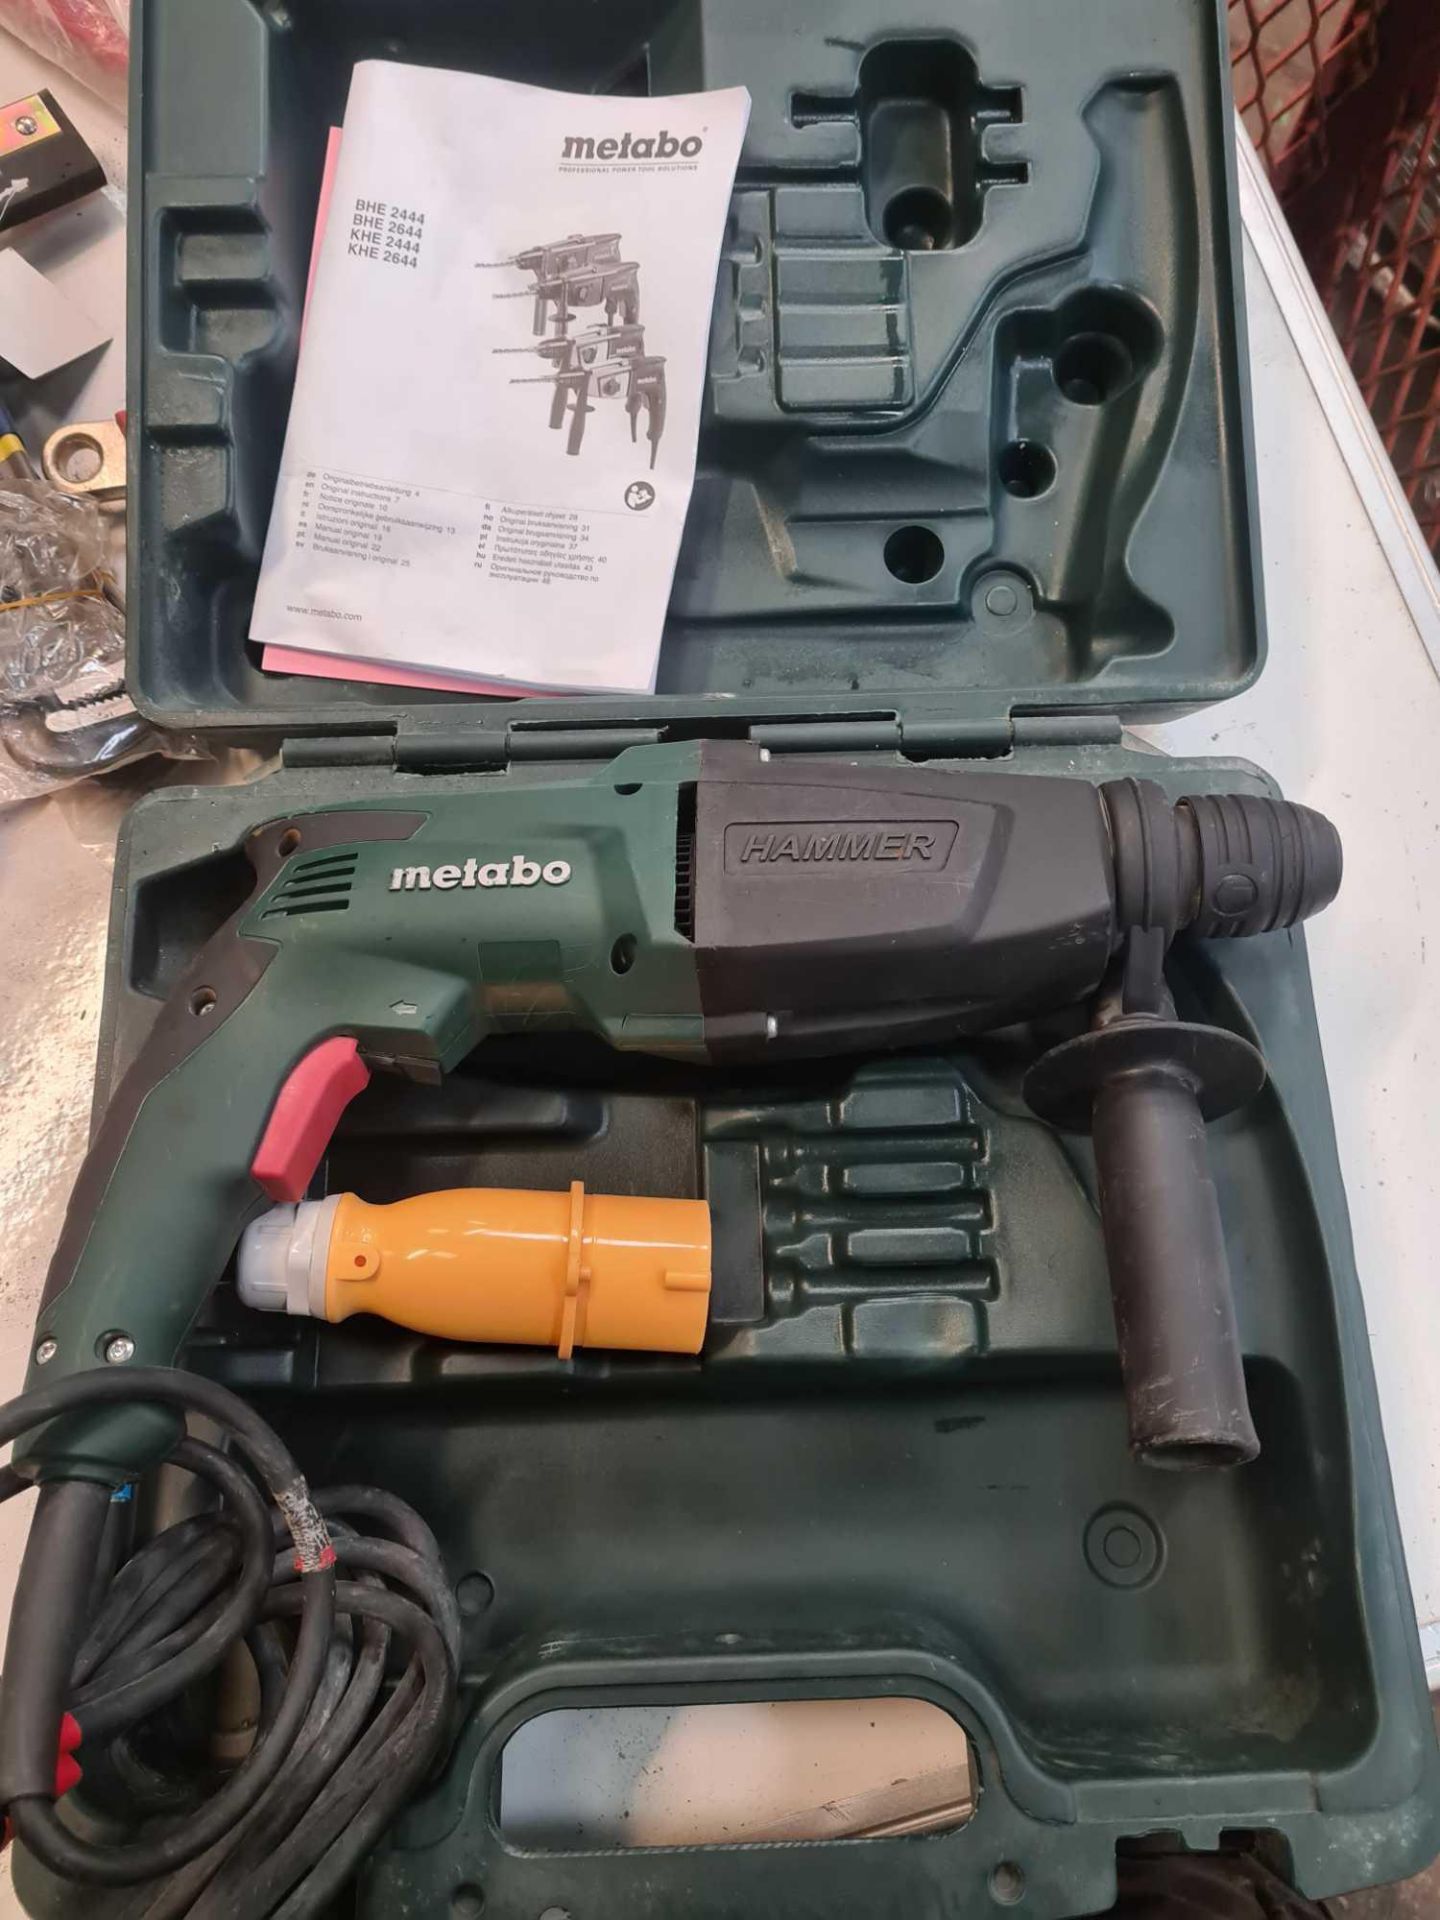 Metabo hammer drill BHE2444 110volts - Image 2 of 2